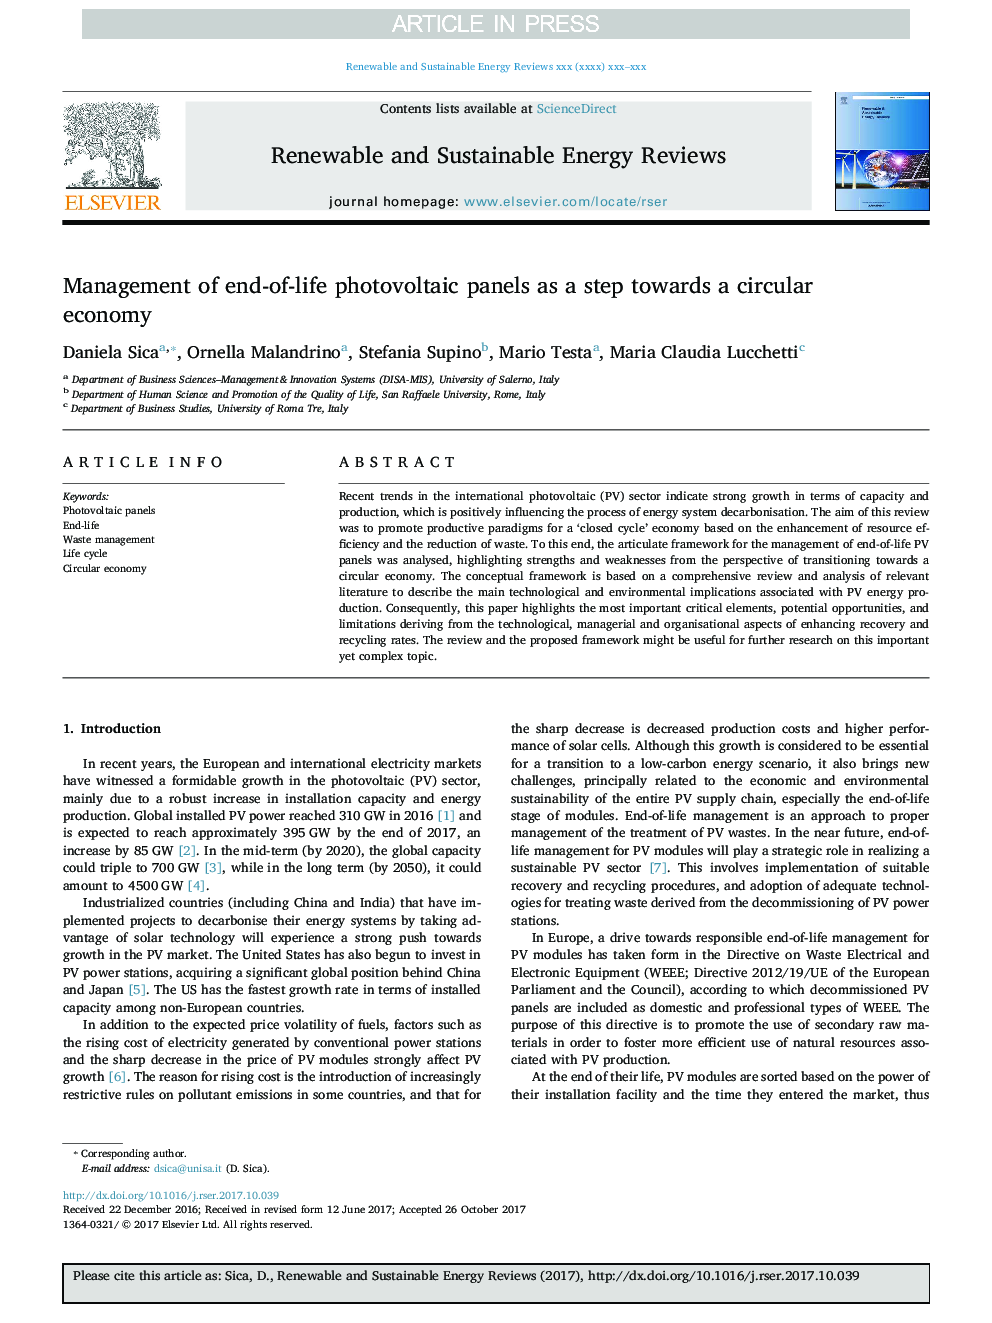 Management of end-of-life photovoltaic panels as a step towards a circular economy